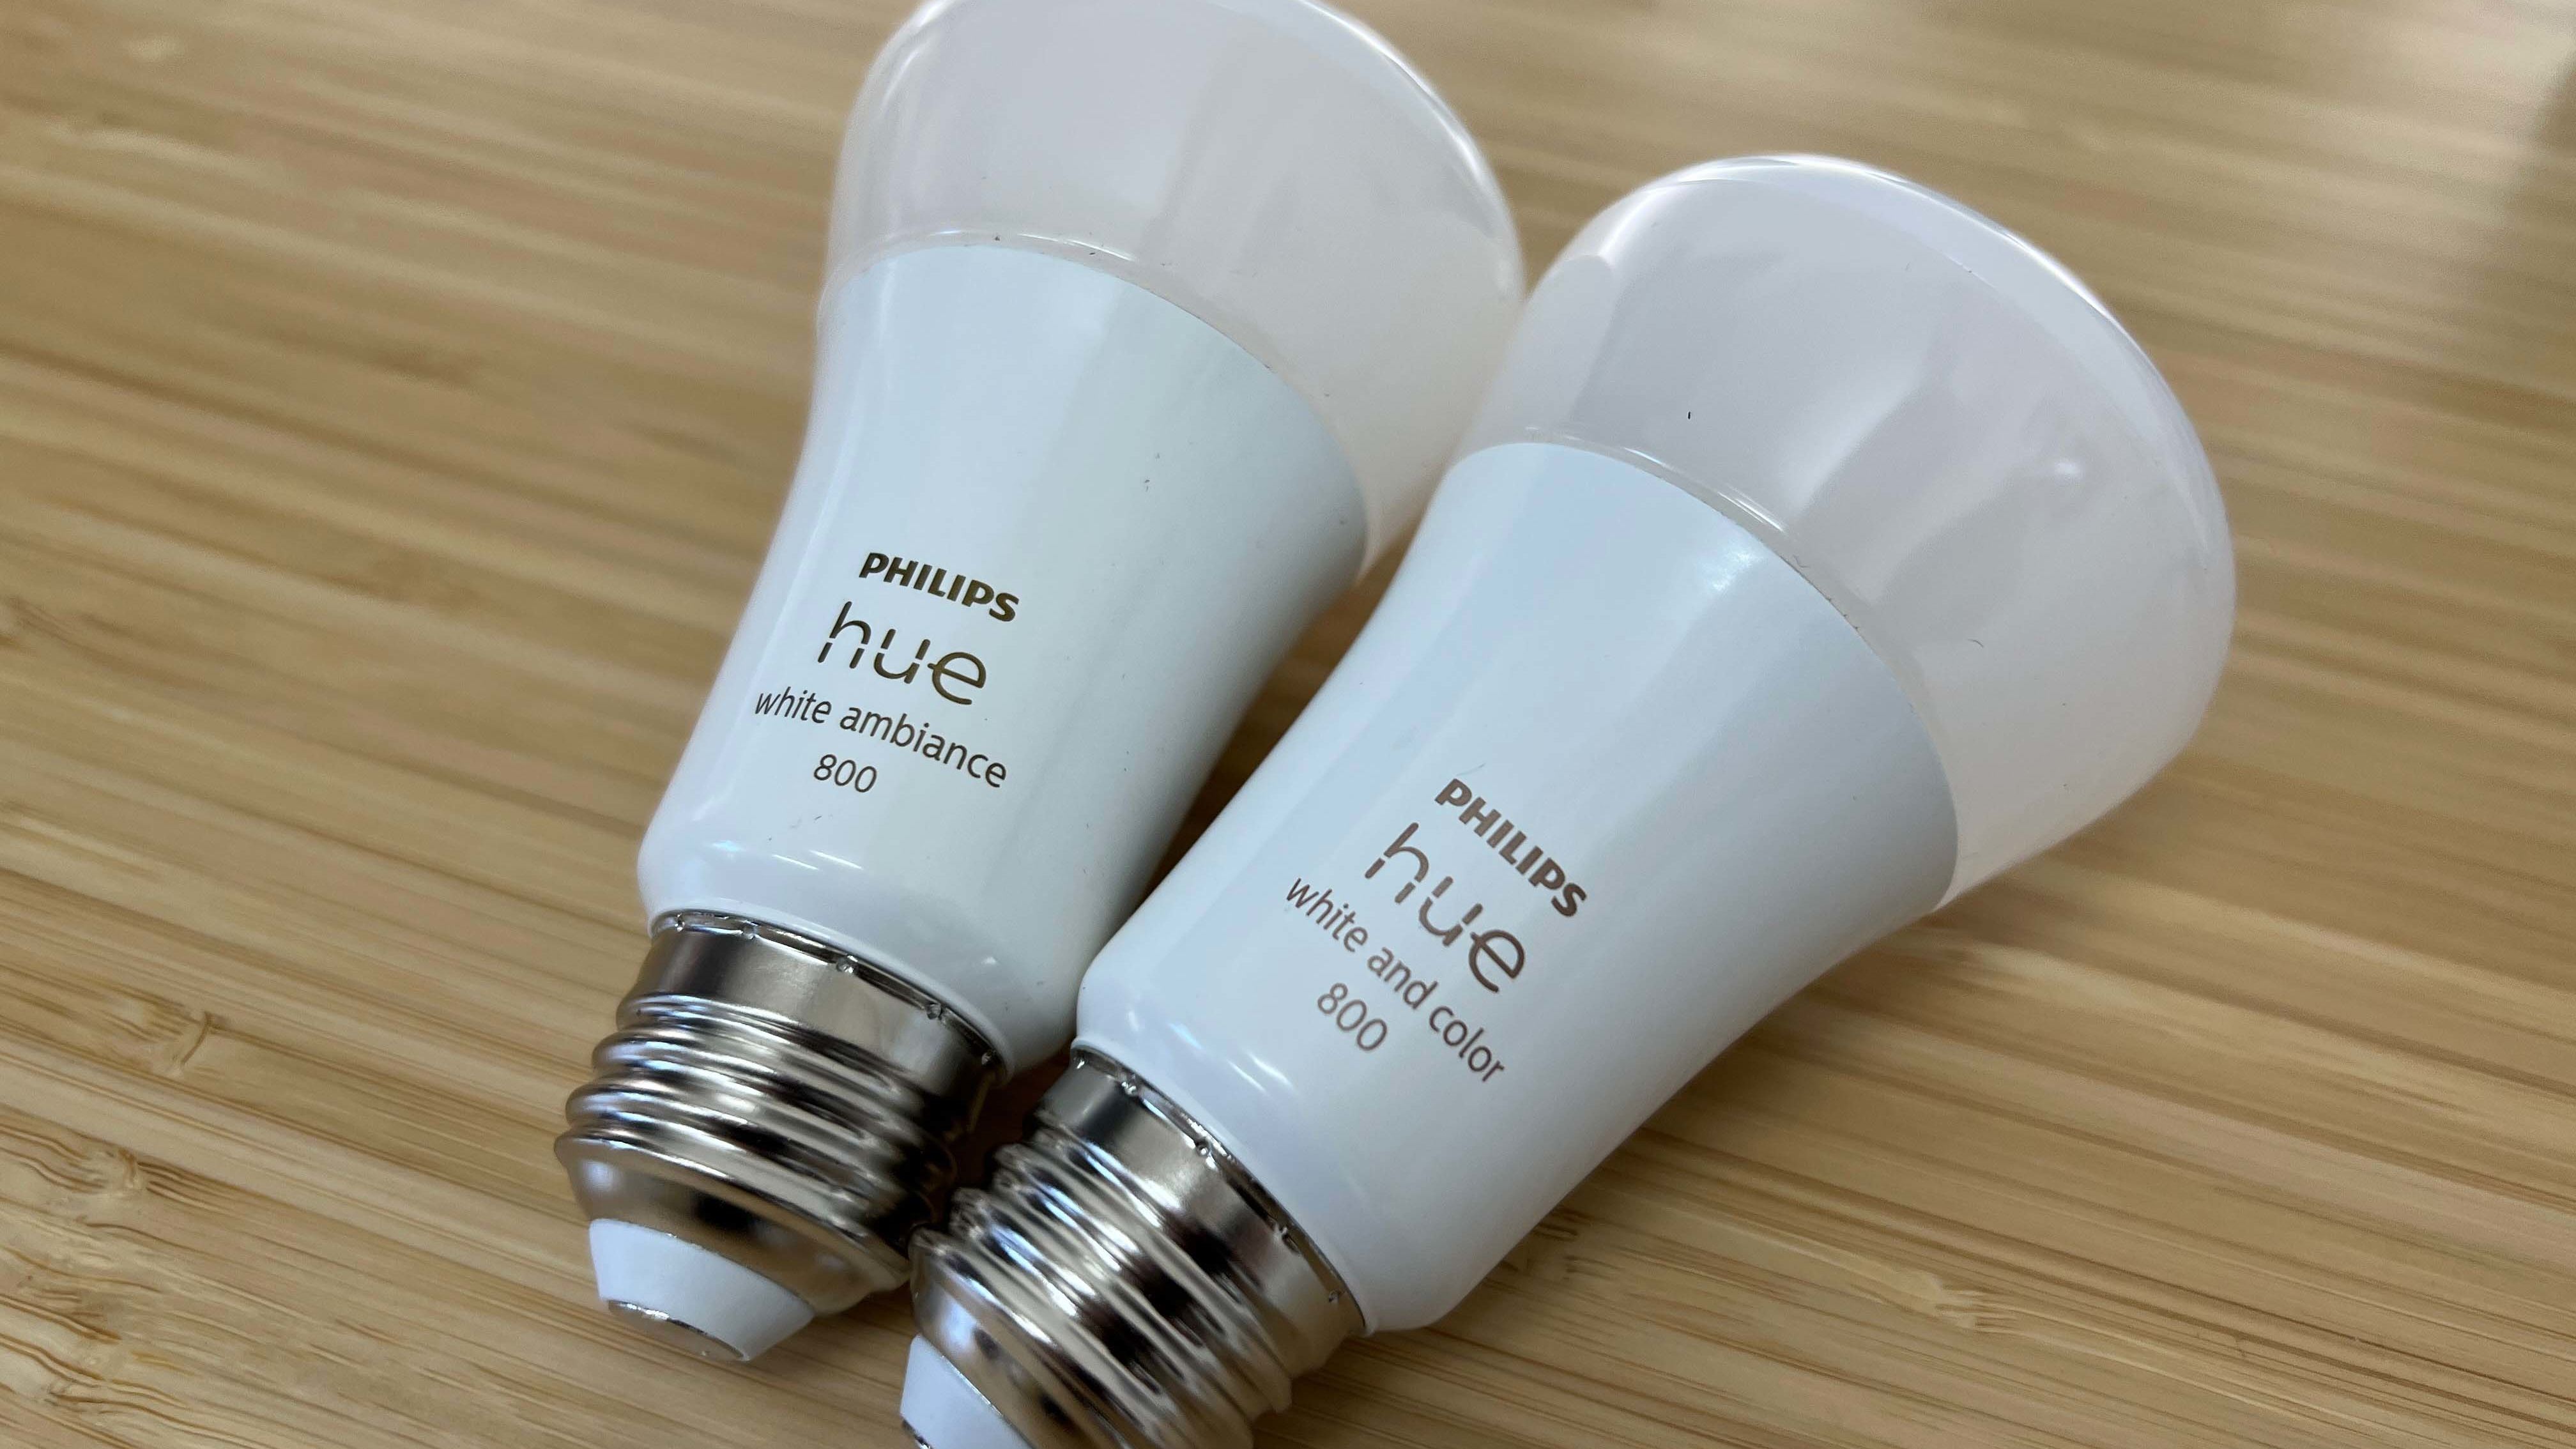 Philips Hue White and Color Ambiance A19 Starter Kit Review